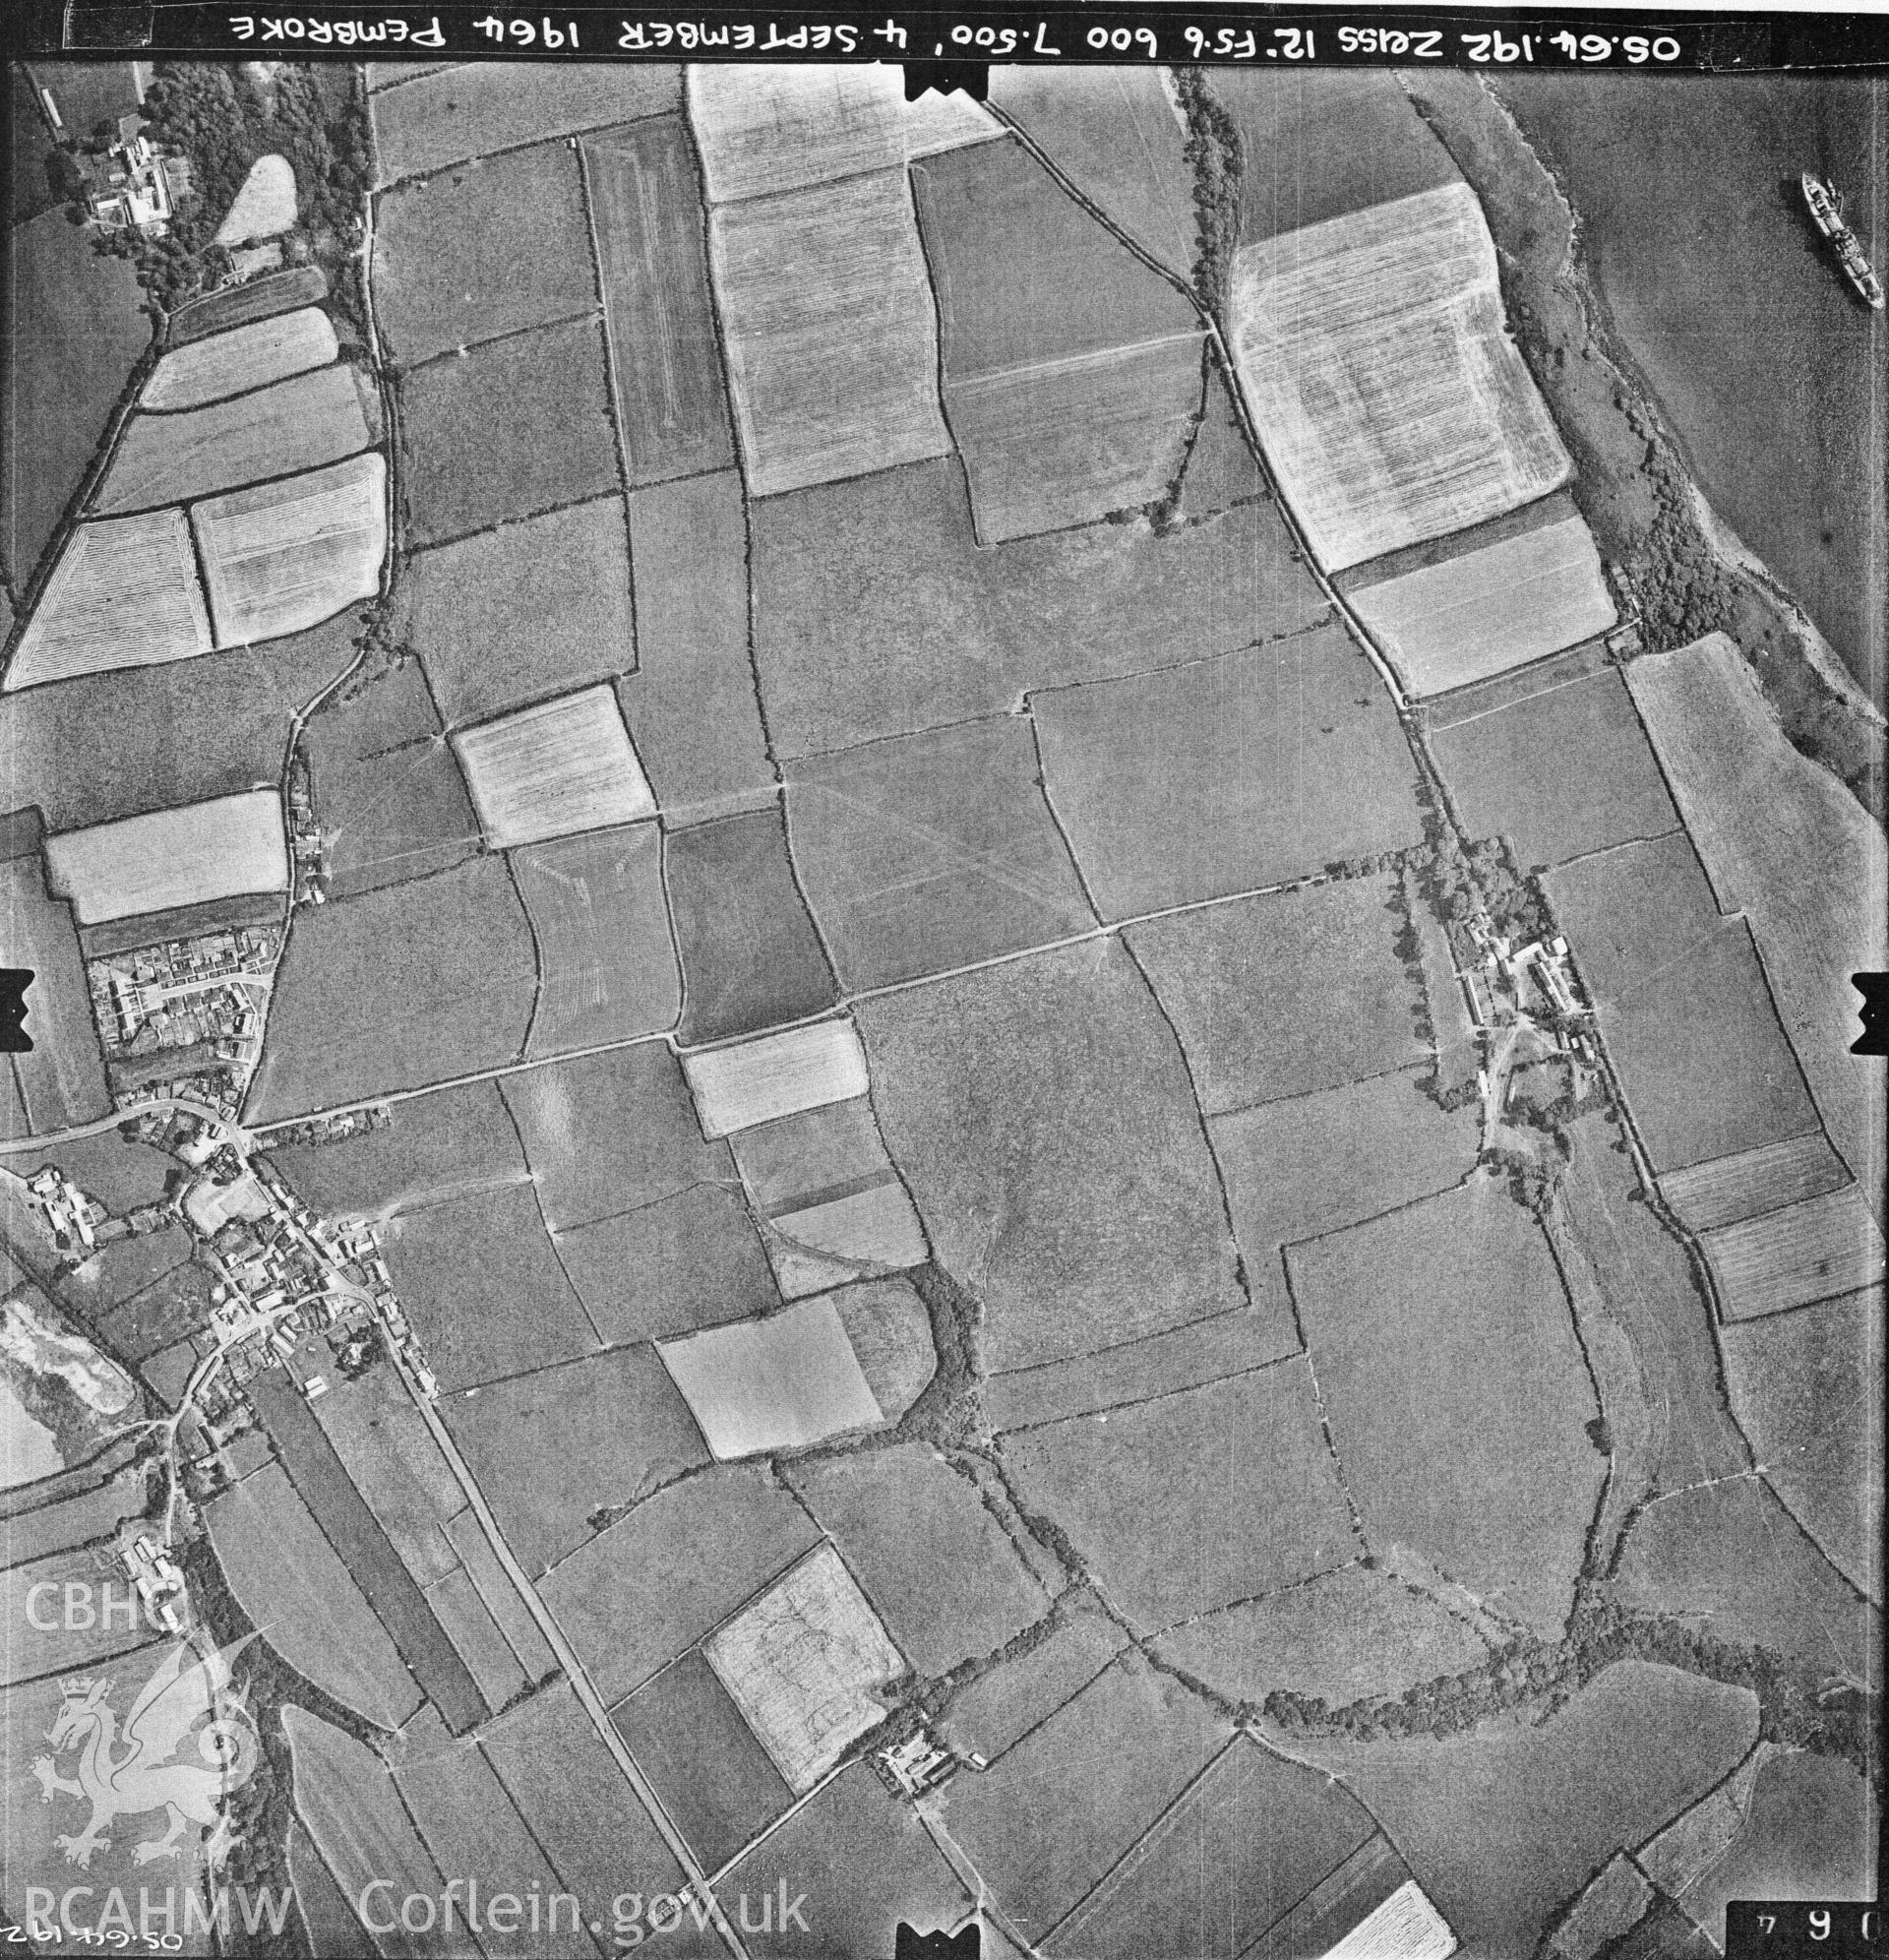 Digital copy of an aerial photograph taken in 1964 , showing the assessment area.